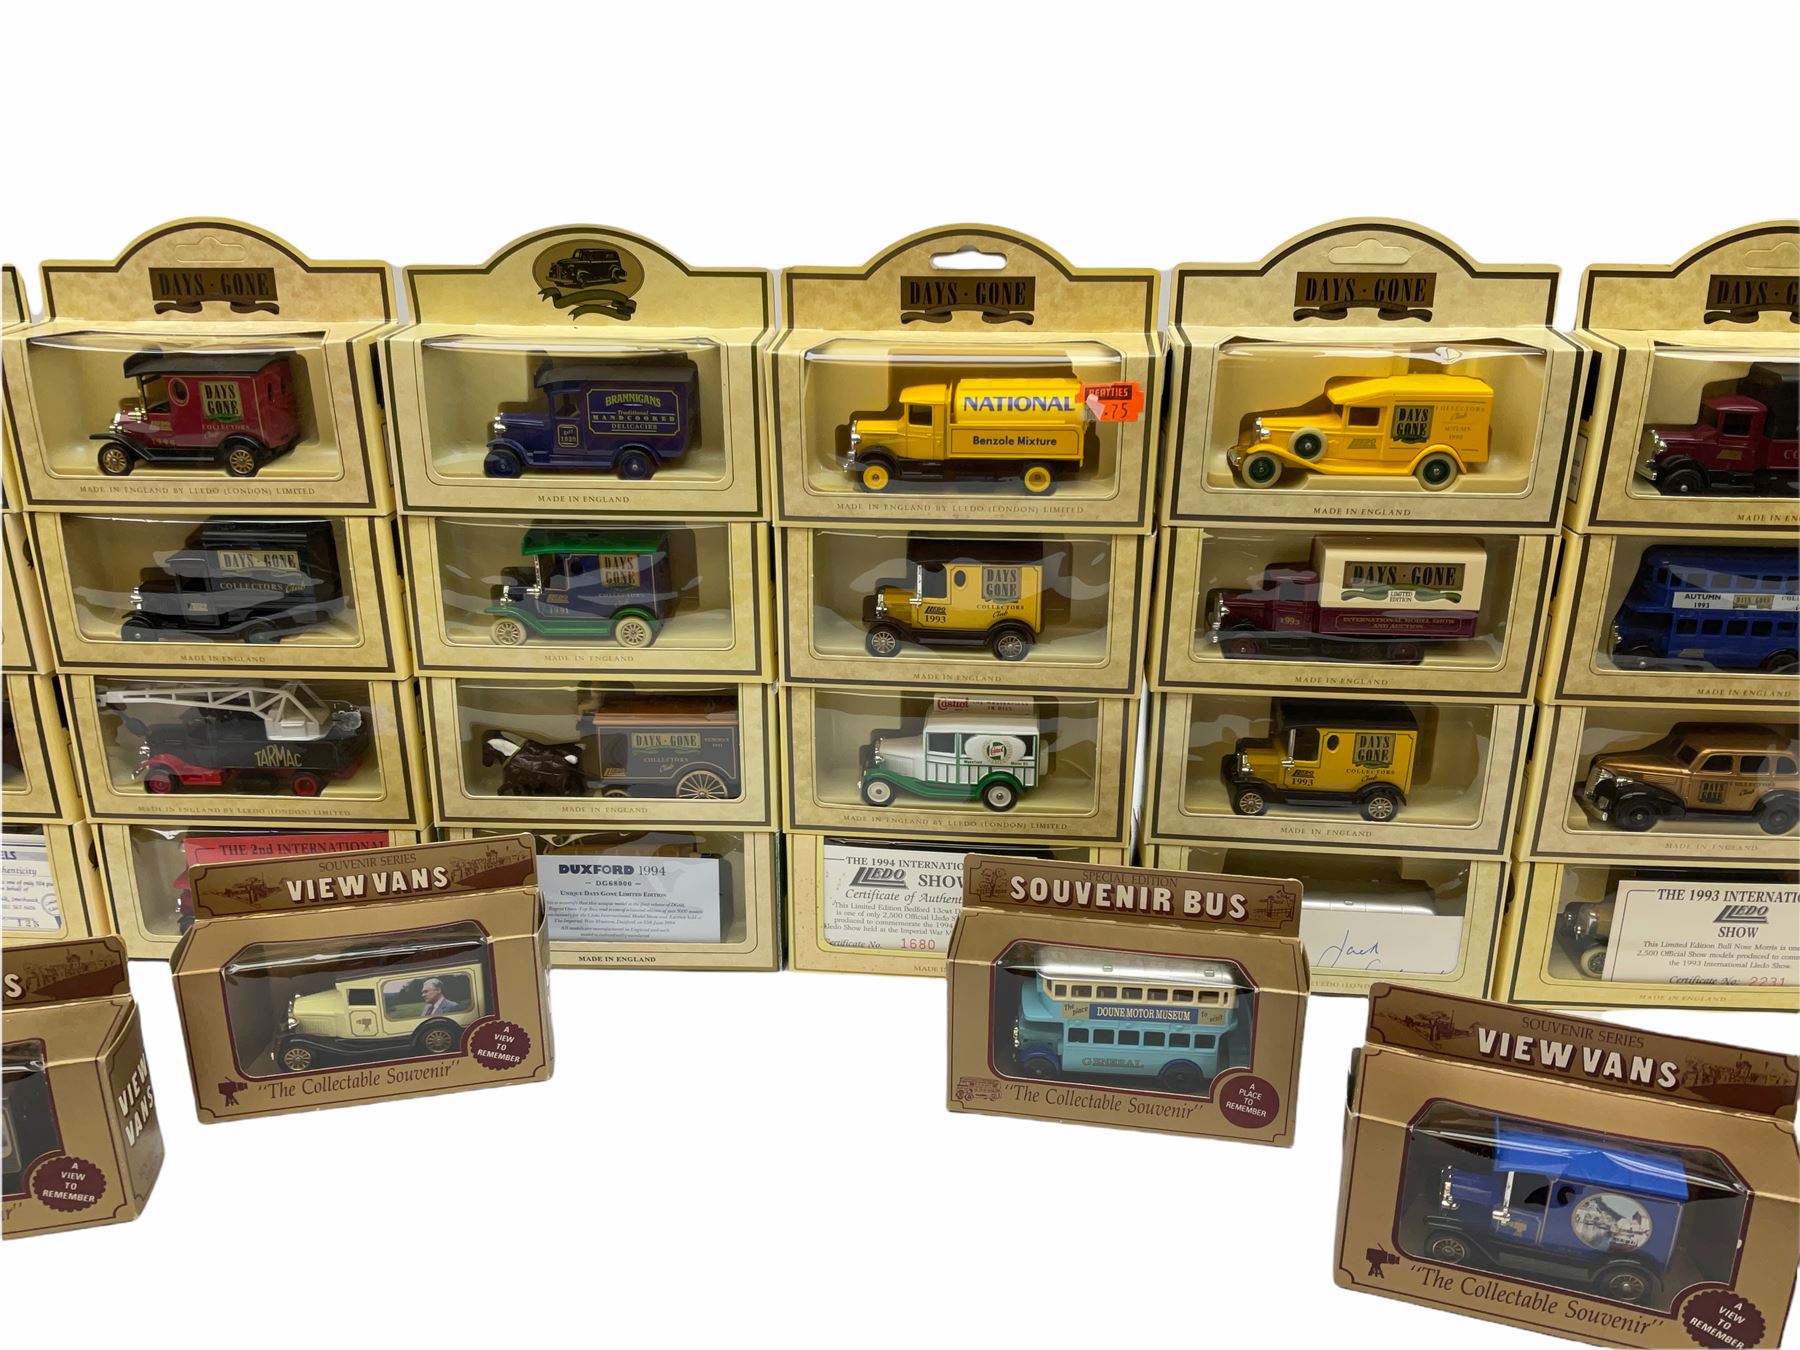 Thirty-eight modern die-cast promotional and advertising models by Lledo including View Vans and Sou - Image 4 of 6